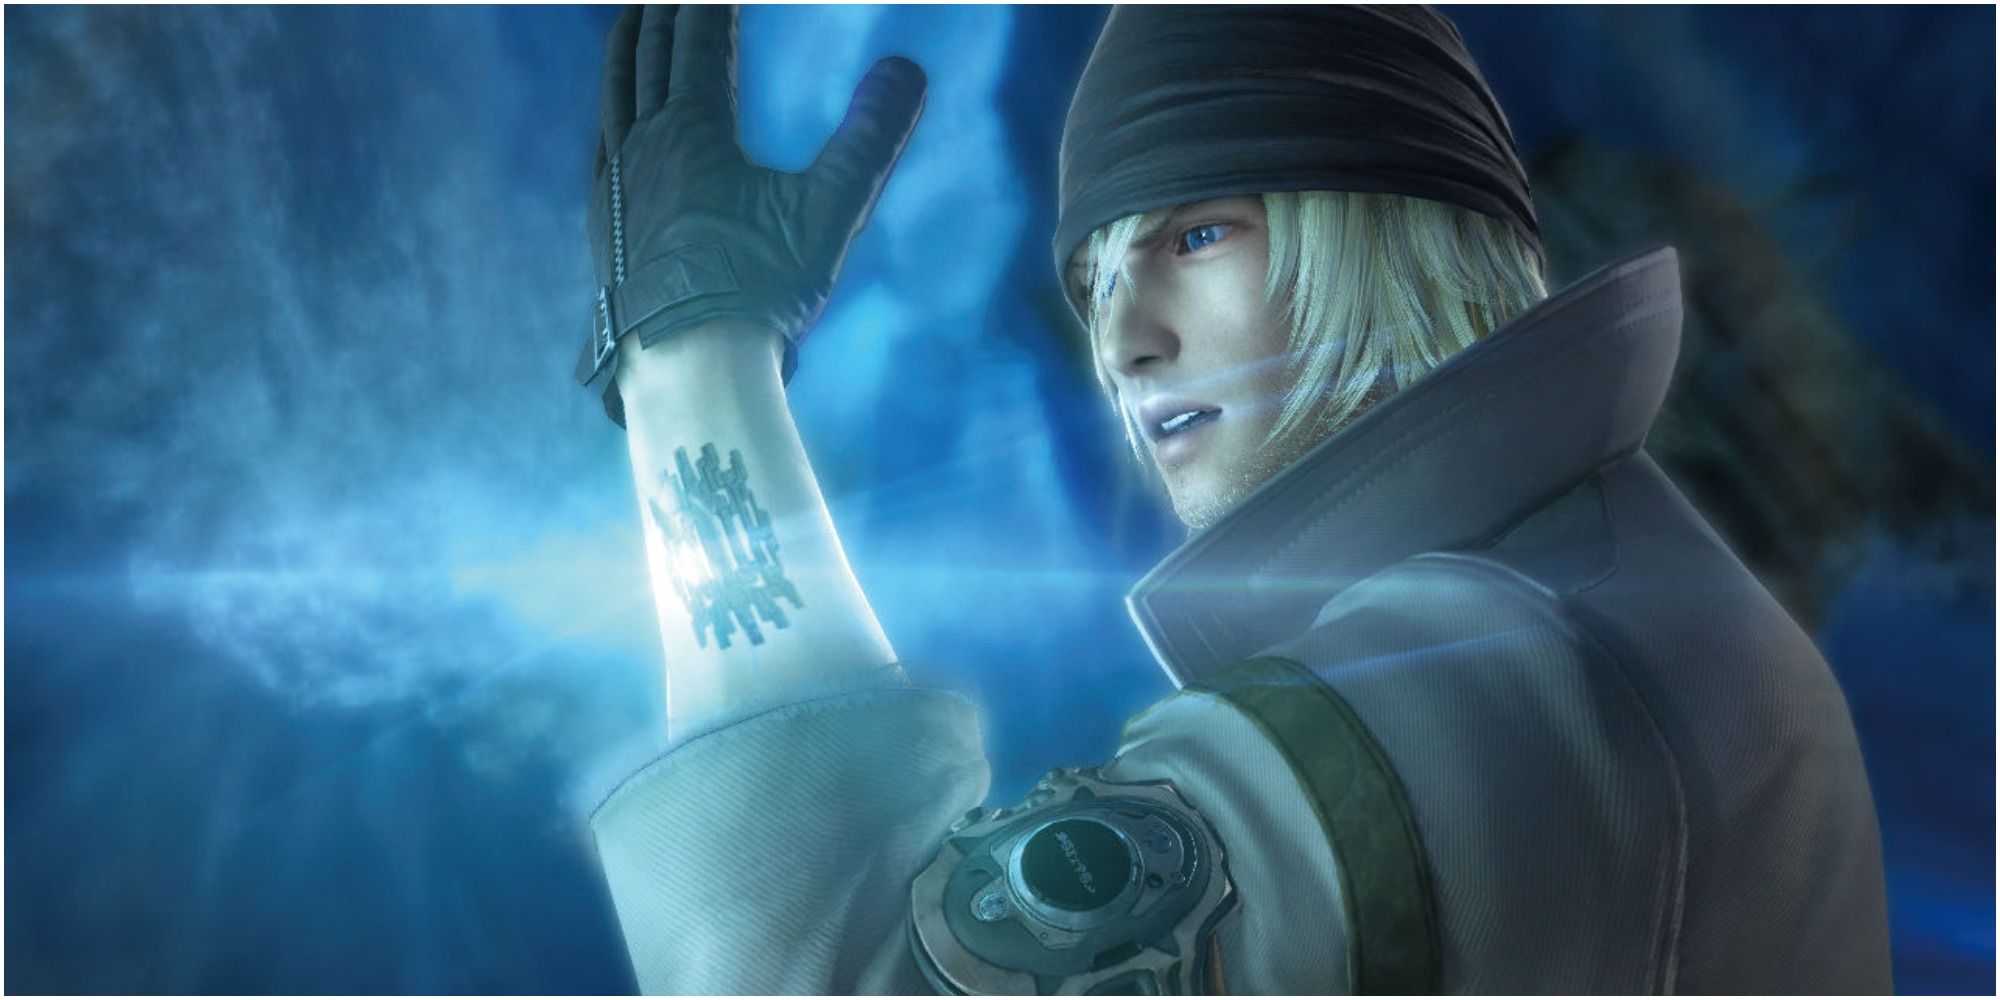 Snow from Final Fantasy 13 awakening his L'Cie Mark used to represent the Sacrificial Circle